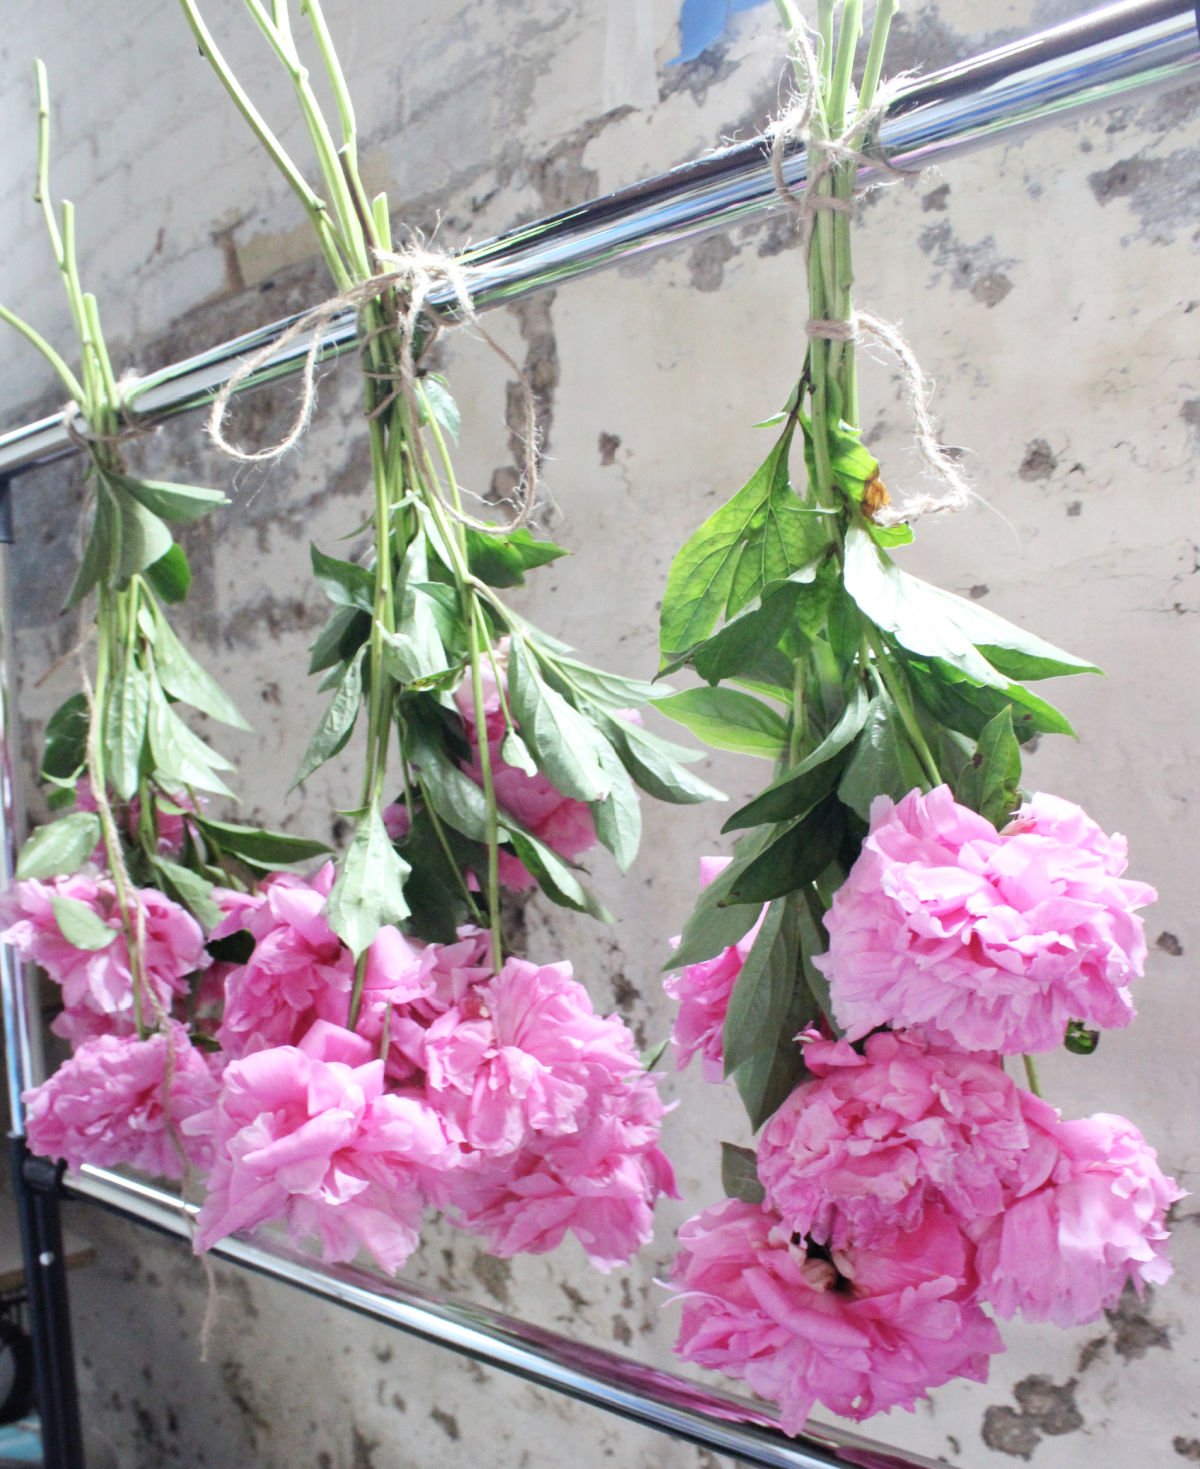 Three small bouquets of bright pink peony's hung upside down to dry.